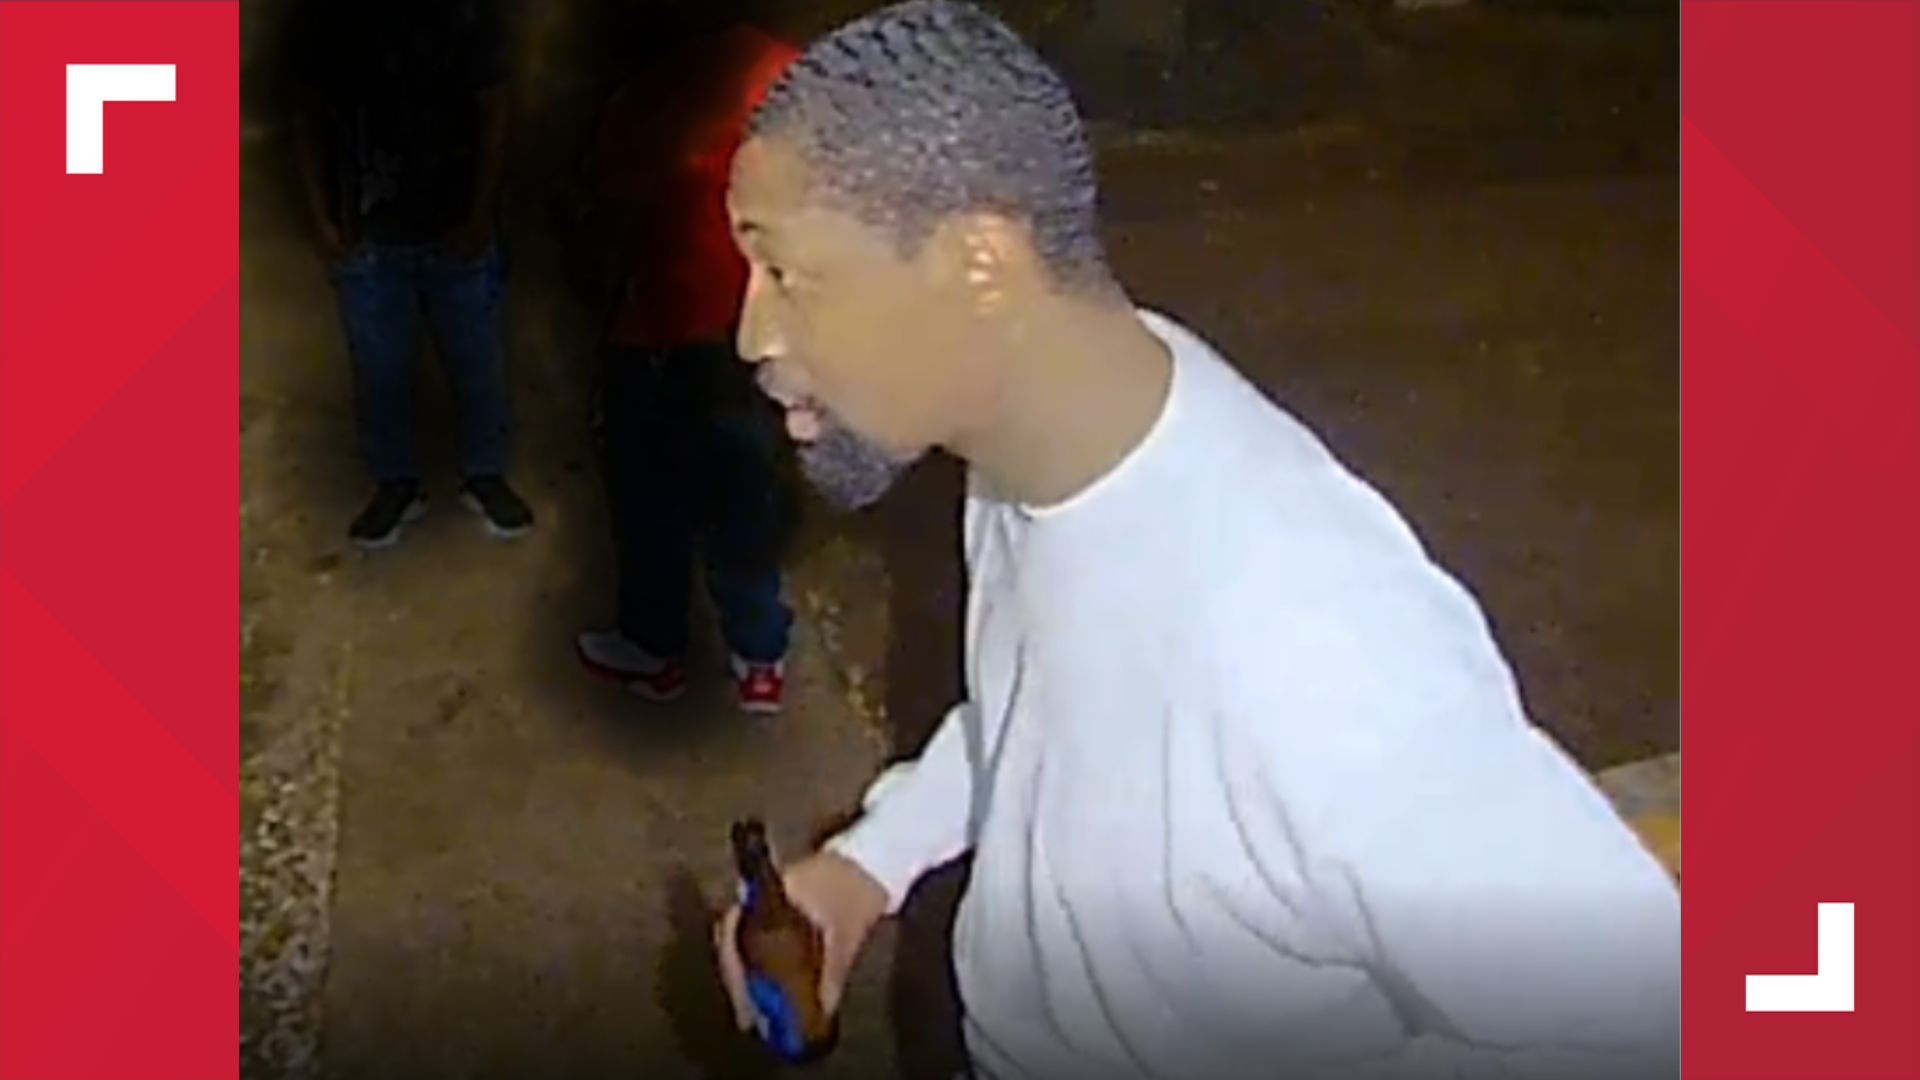 The Killeen Police Department needs help identifying a suspect connected to a shooting at a local bar that left one man hospitalized.